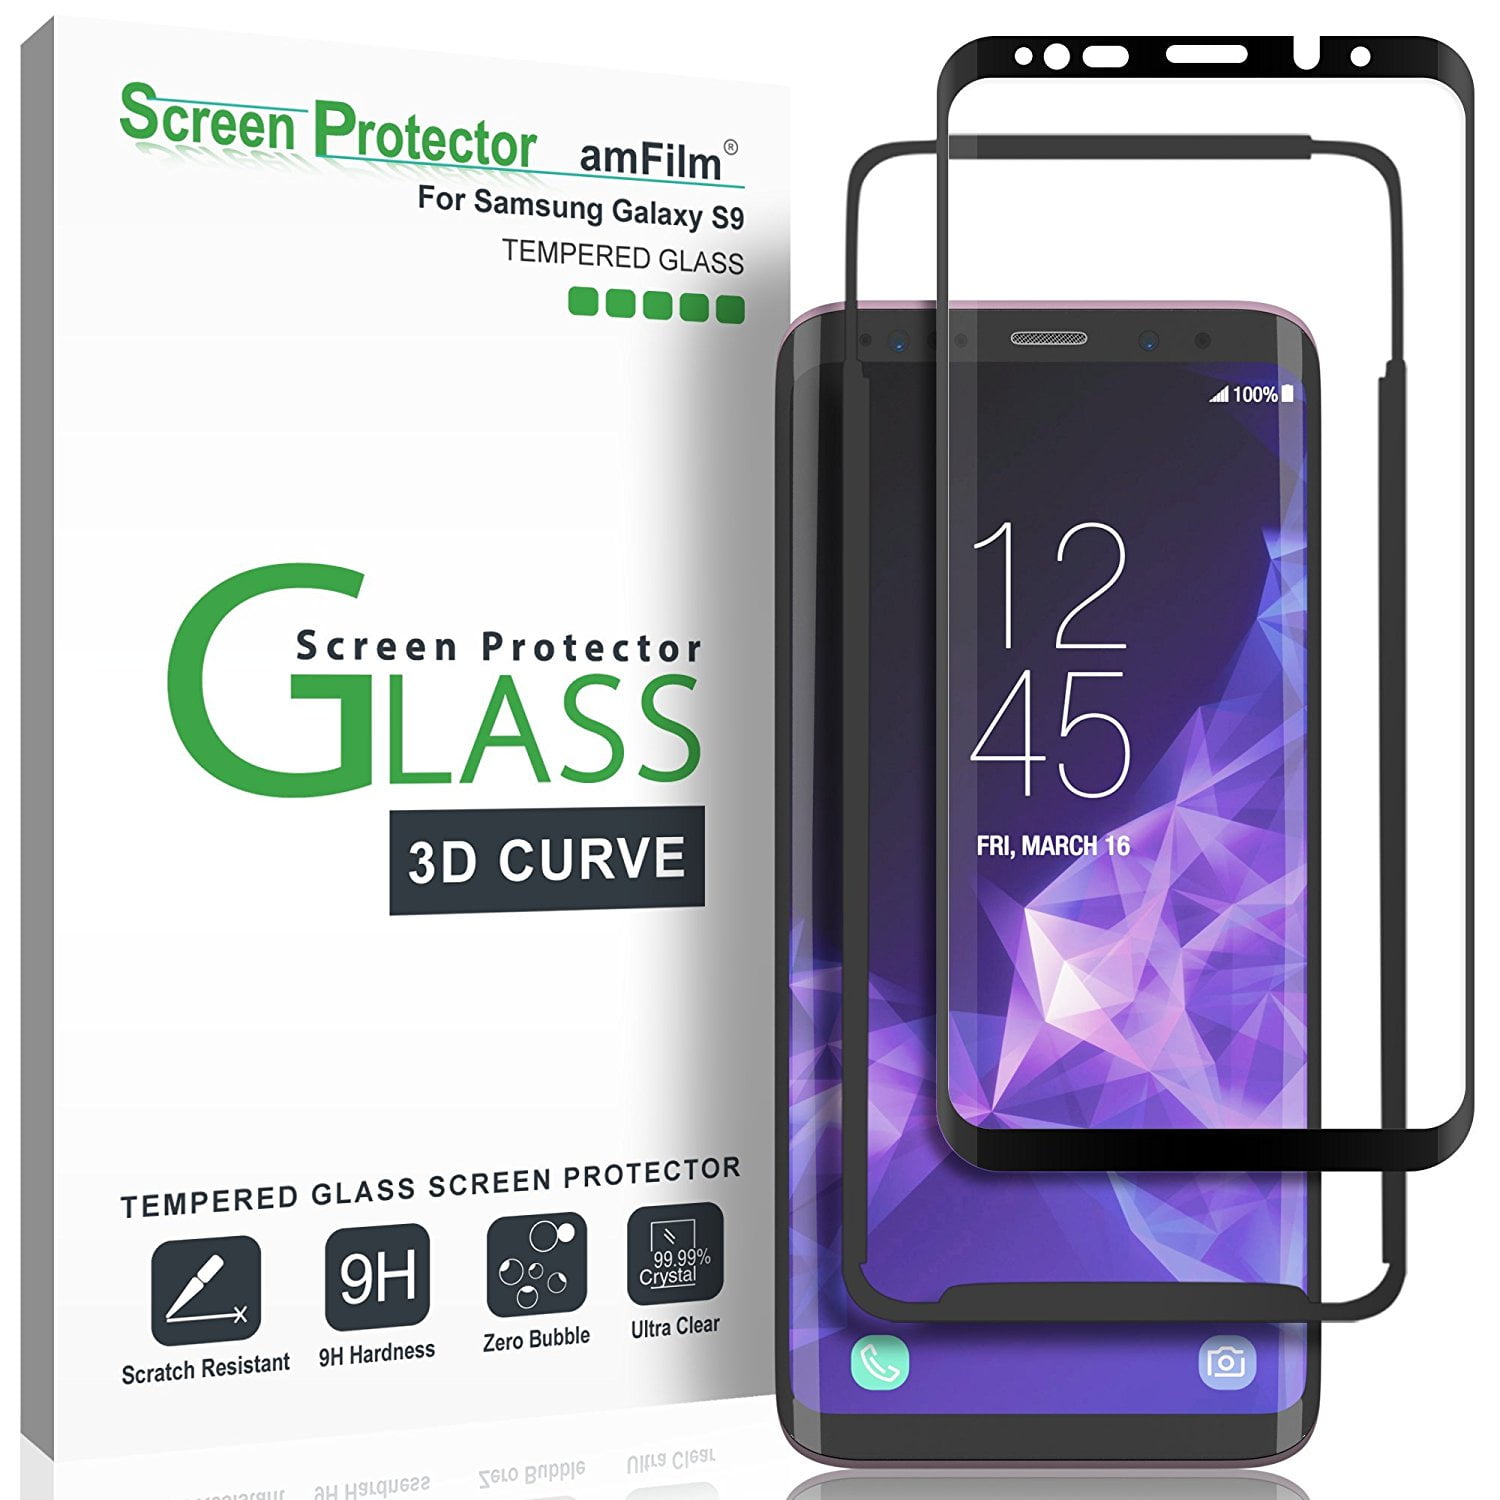 Shockproof Scratchproof oilproof Screen Protectors Totill Easy install Comfortable Round Edge Crystal Clarity 3 Pack Case Friendly Tempered Glass for Samsung Galaxy A71 Screen Protector